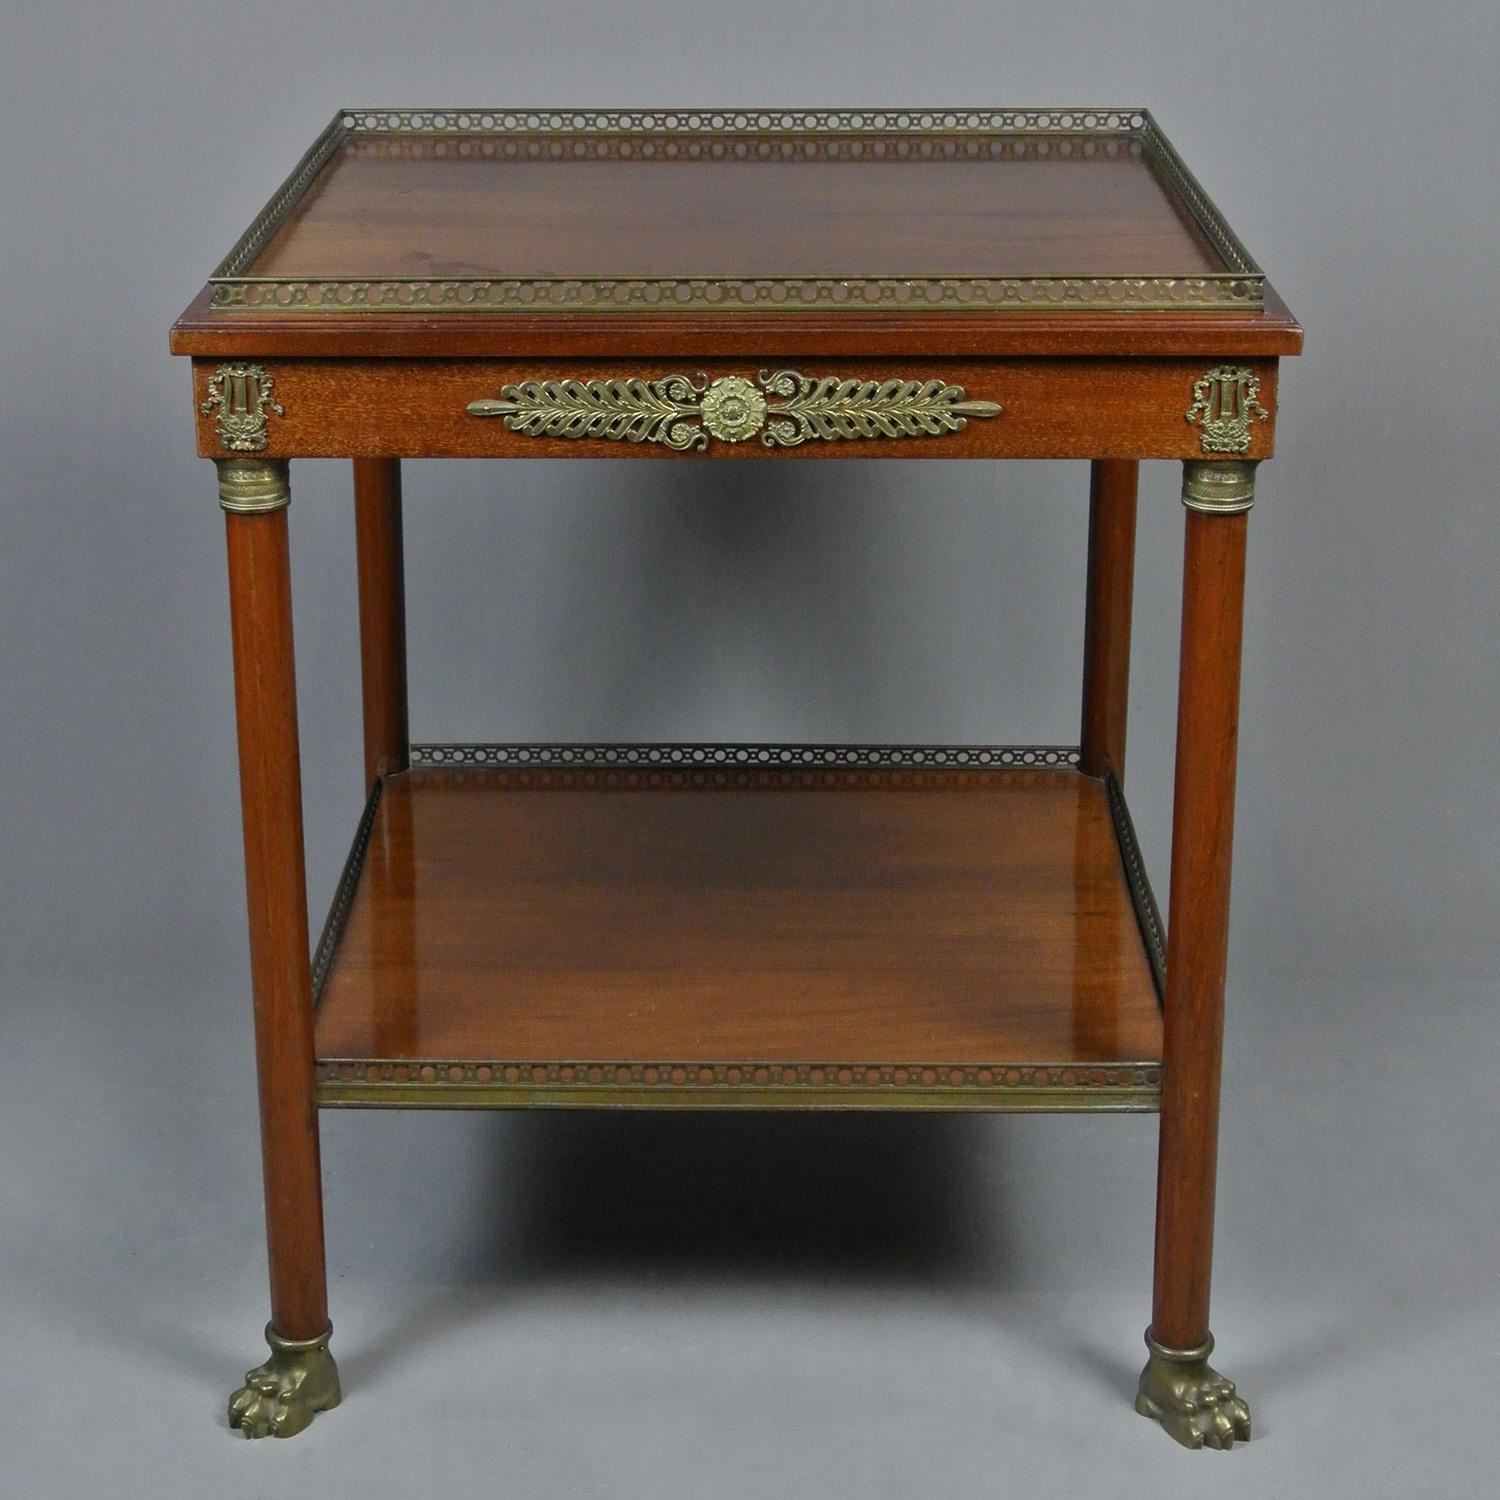 A very fine solid mahogany two tier centre table with intricate original brass galleries, ormolu mounts and lovely solid brass lion paw feet.

Both shelves formed from single boards of mahogany and bordered with a beautiful solid brass gallery of